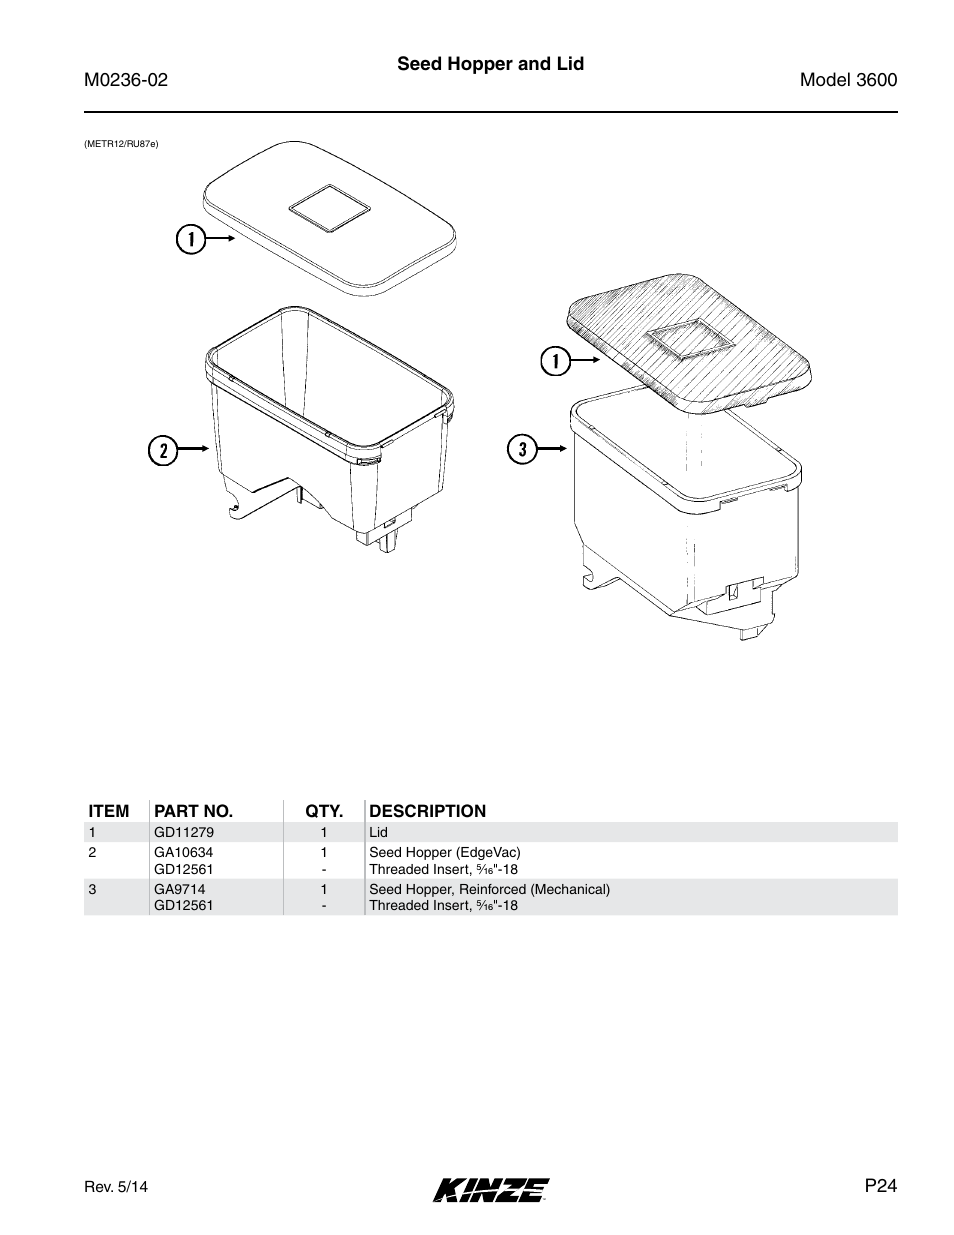 Seed hopper and lid | Kinze 3600 Lift and Rotate Planter Rev. 5/14 User Manual | Page 27 / 302